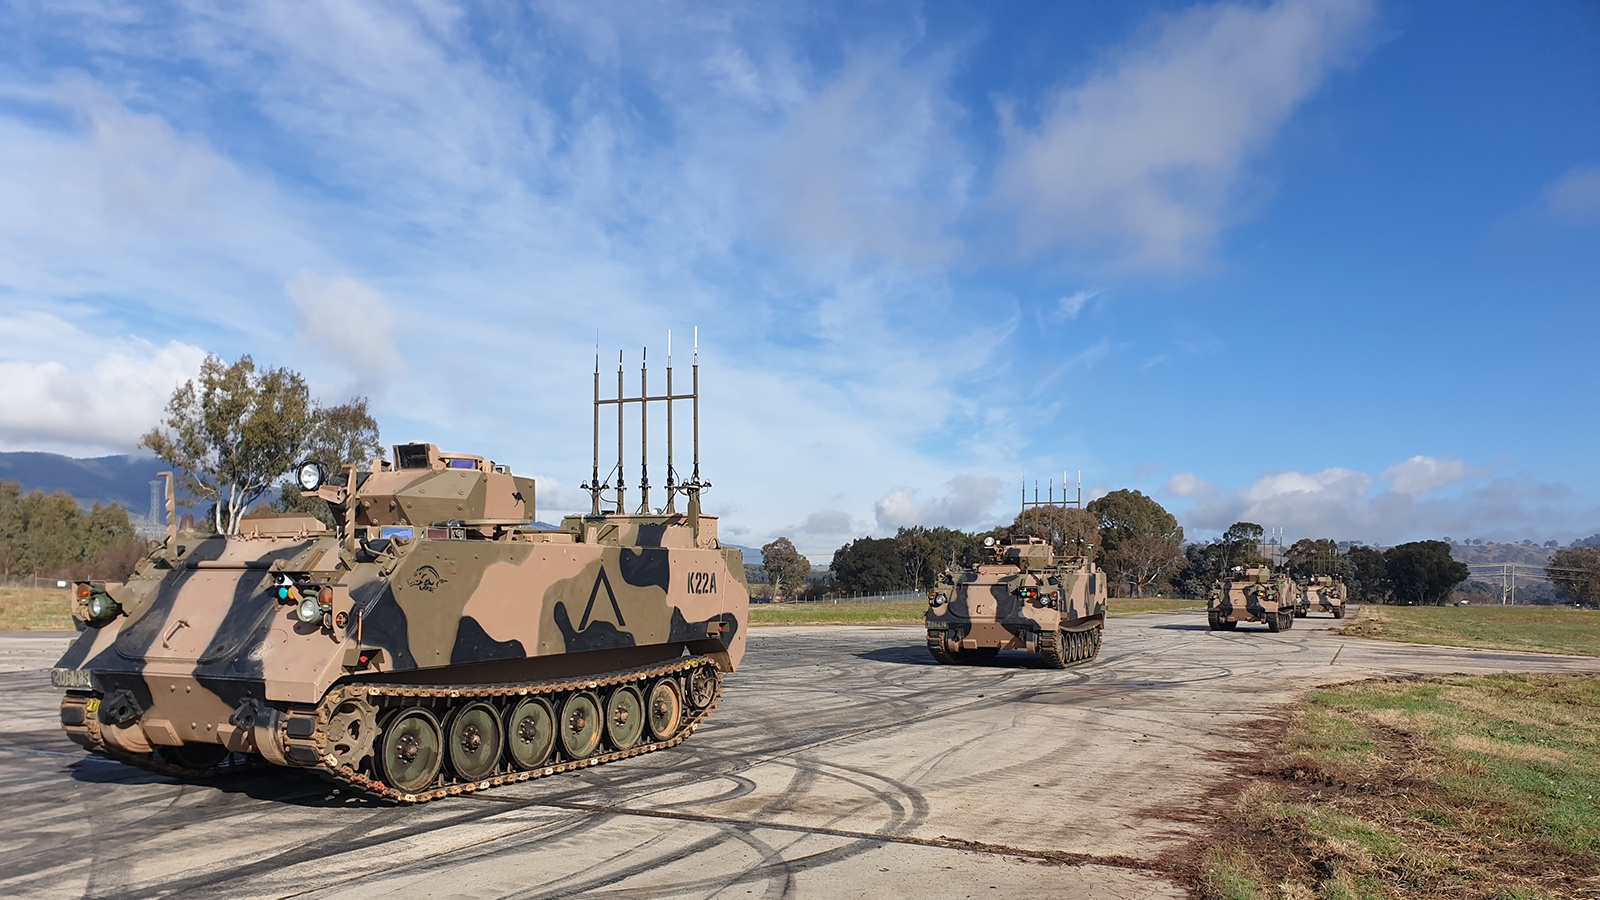 BAE Systems Delivers 20 M113 AS4 Optionally Crewed Combat Vehicles to Australian Army